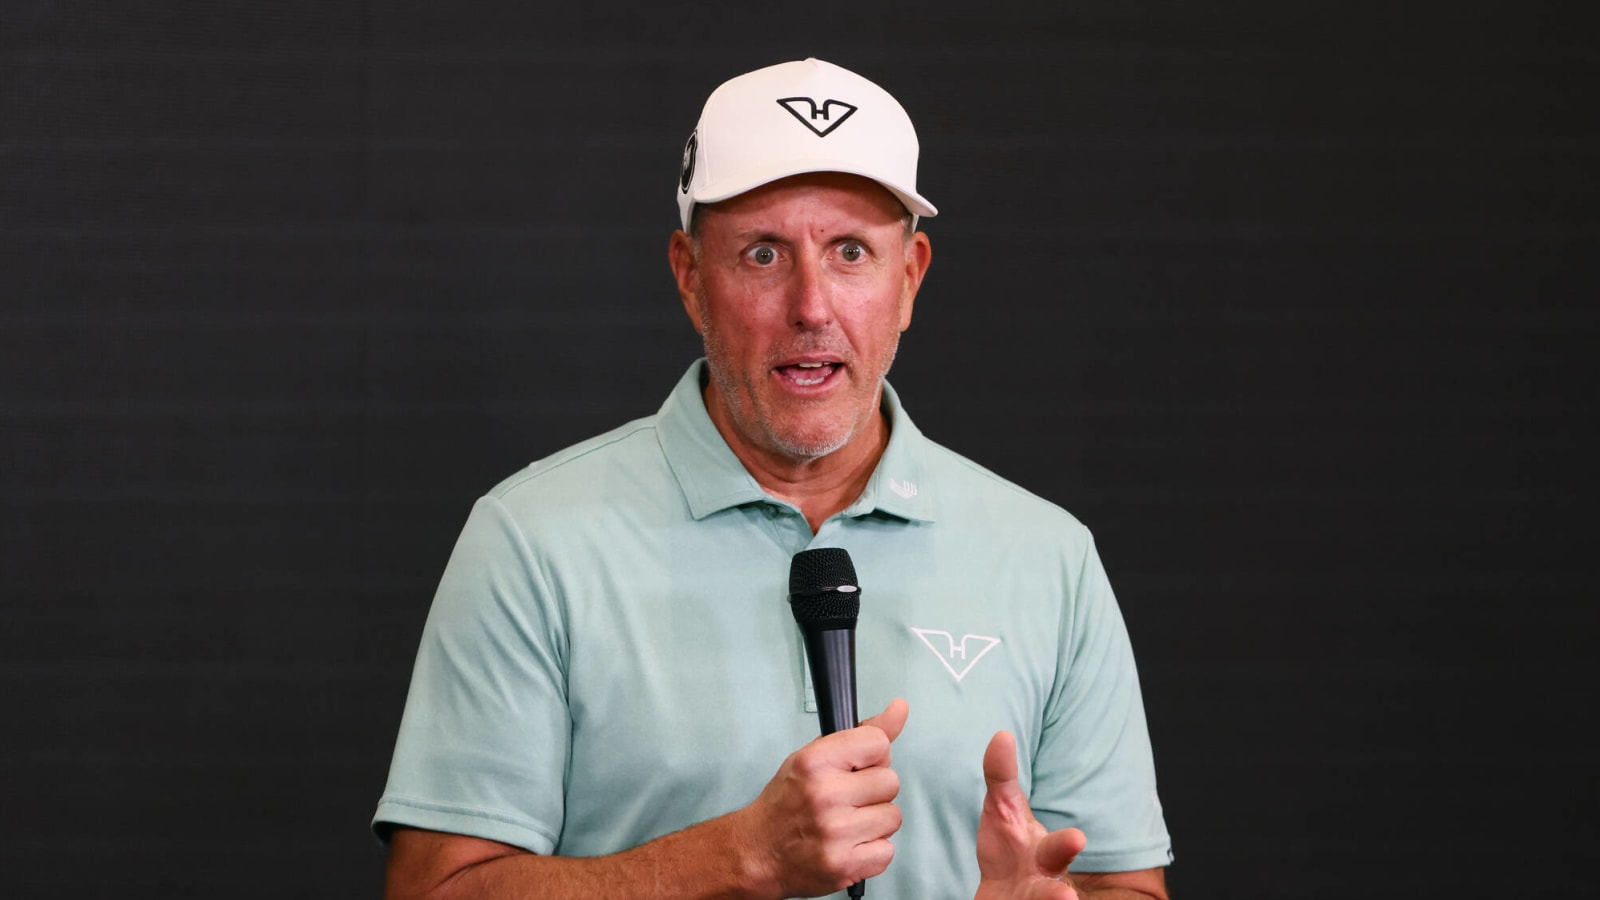 6x major champion Phil Mickelson claims golf is in ‘disruption phase’, expresses confidence in Yasir Al-Rumayyan’s vision for future